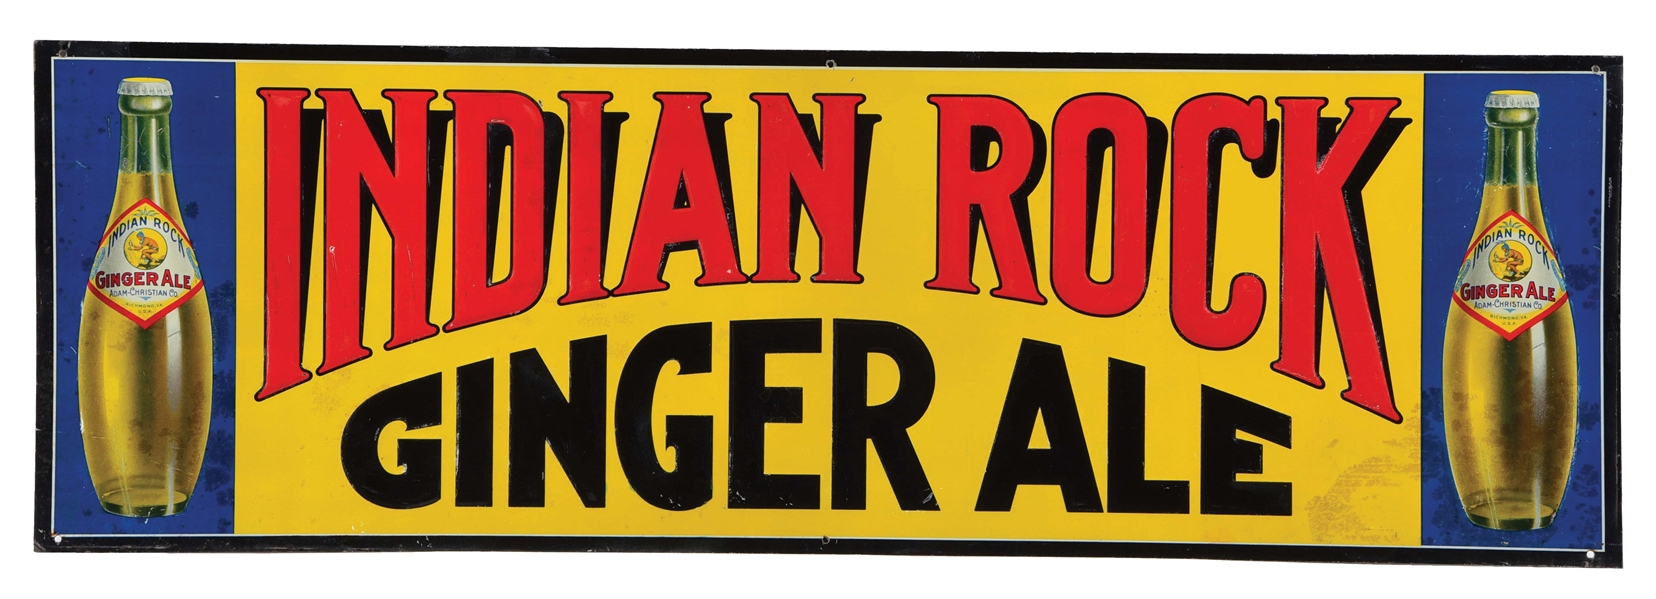 OUTSTANDING INDIAN ROCK GINGER ALE TIN SIGN W/ BOTTTLE GRAPHICS.